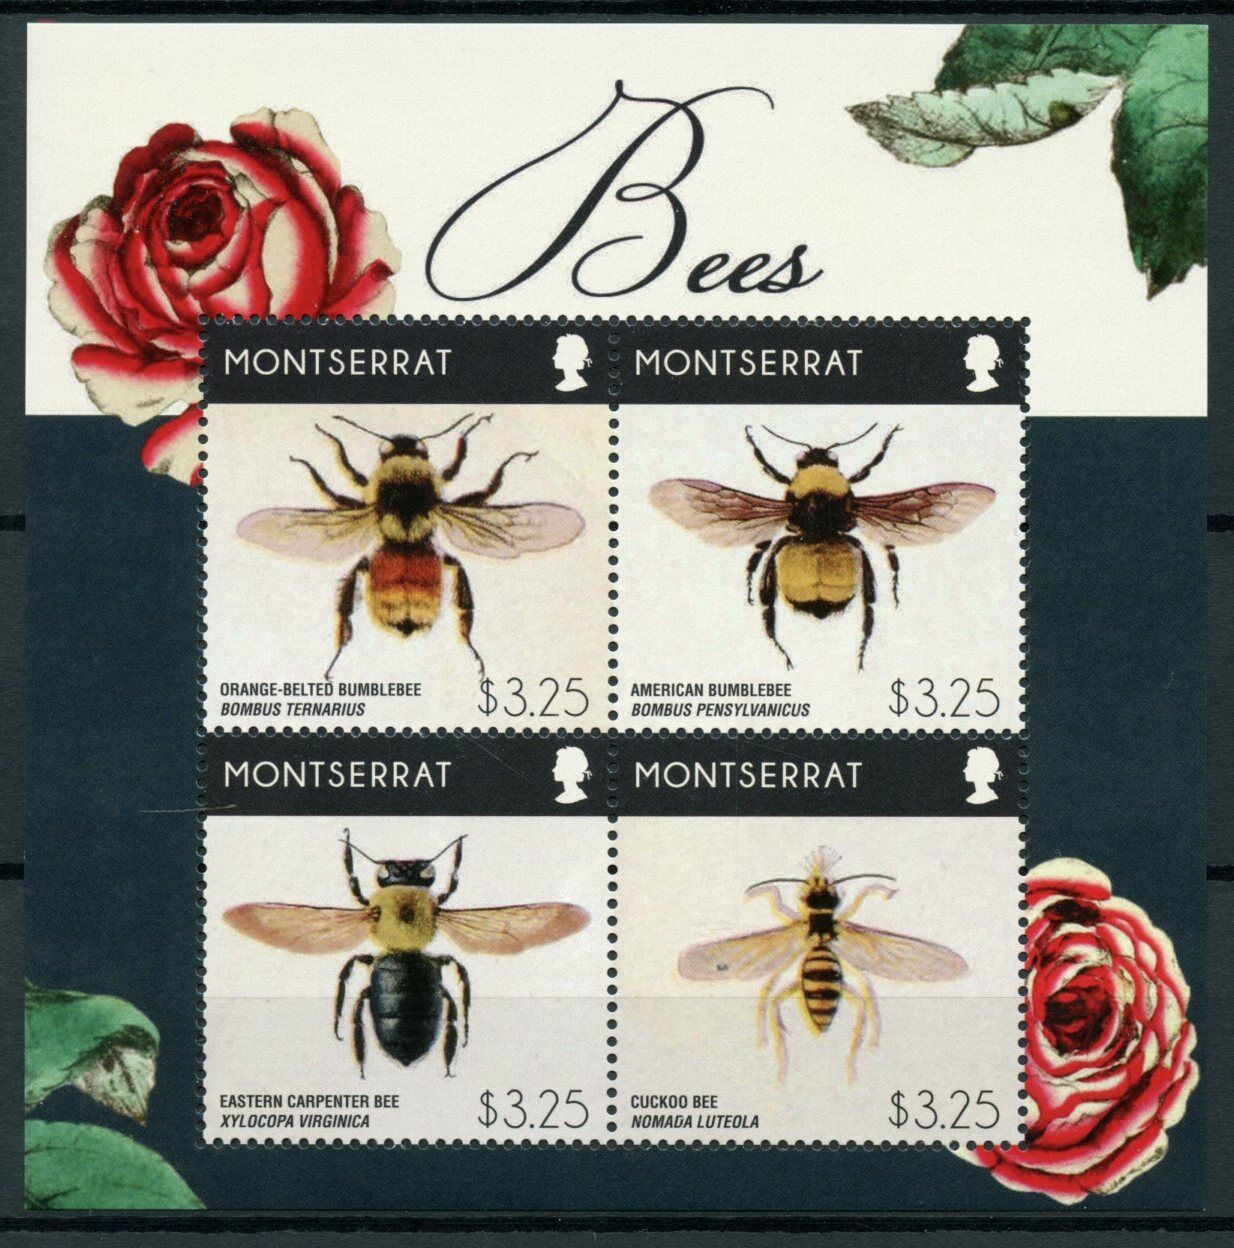 Montserrat Bees Stamps 2015 MNH Bumblebee Carpenter Bee Insects 4v M/S